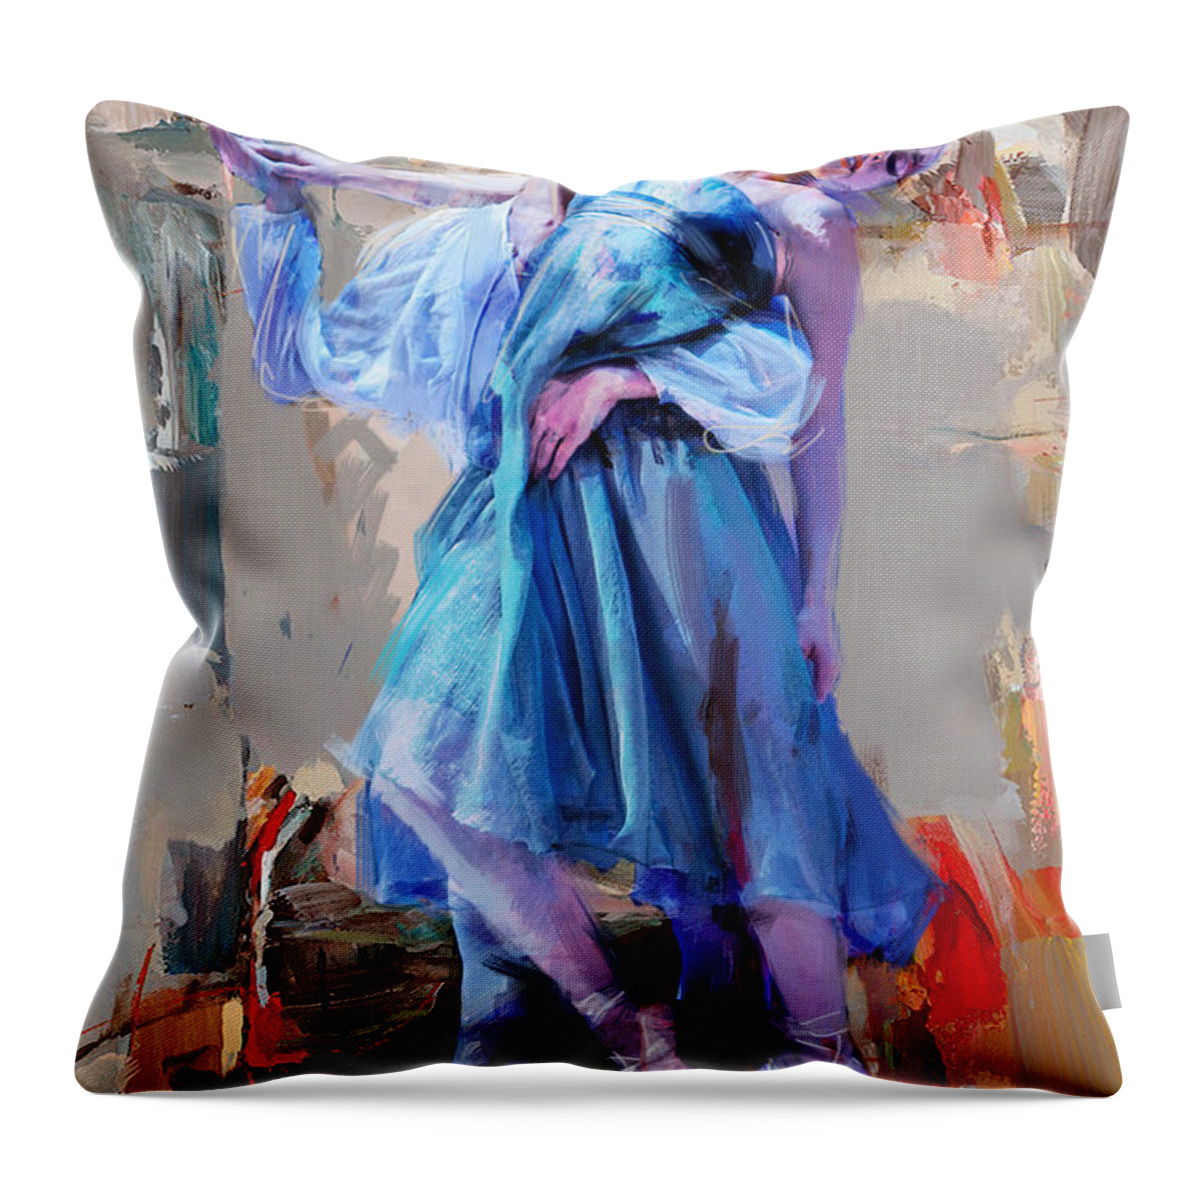 Catf Throw Pillow featuring the painting Ballerina 37 by Mahnoor Shah